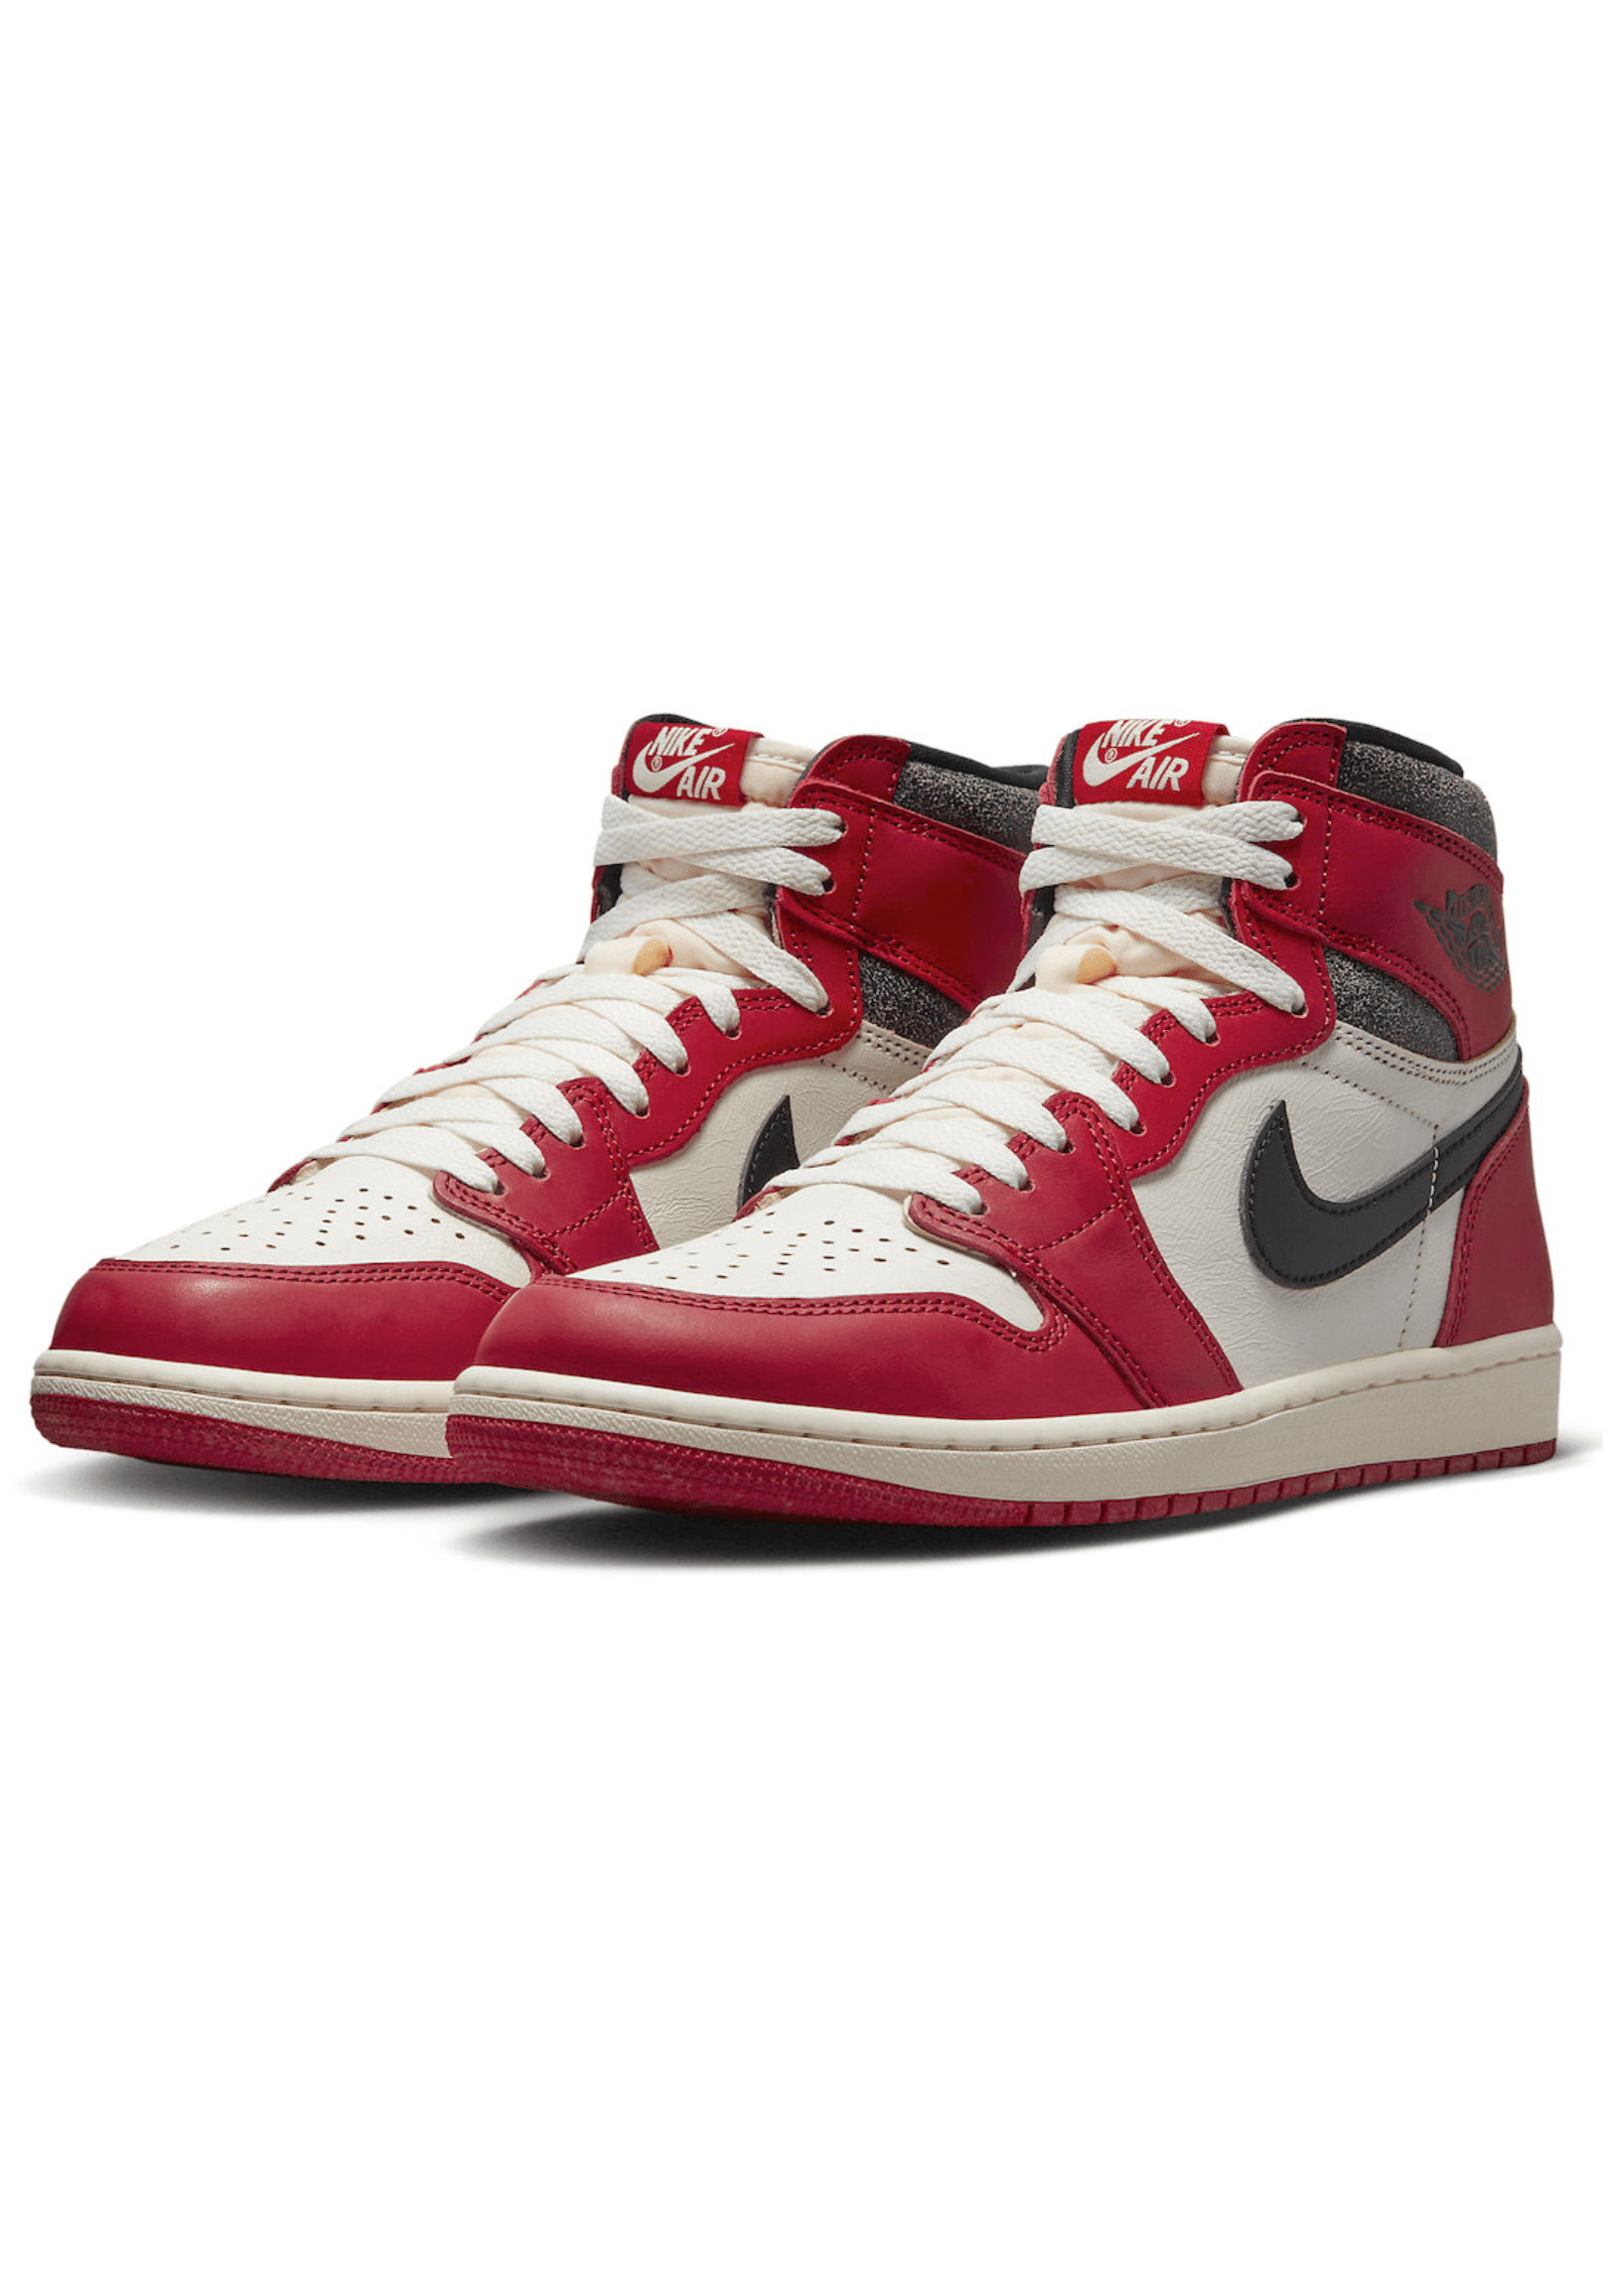 NIKE AIR JORDAN 1 RETRO HIGH OG CHICAGO LOST AND FOUND (GS) WOMEN'S